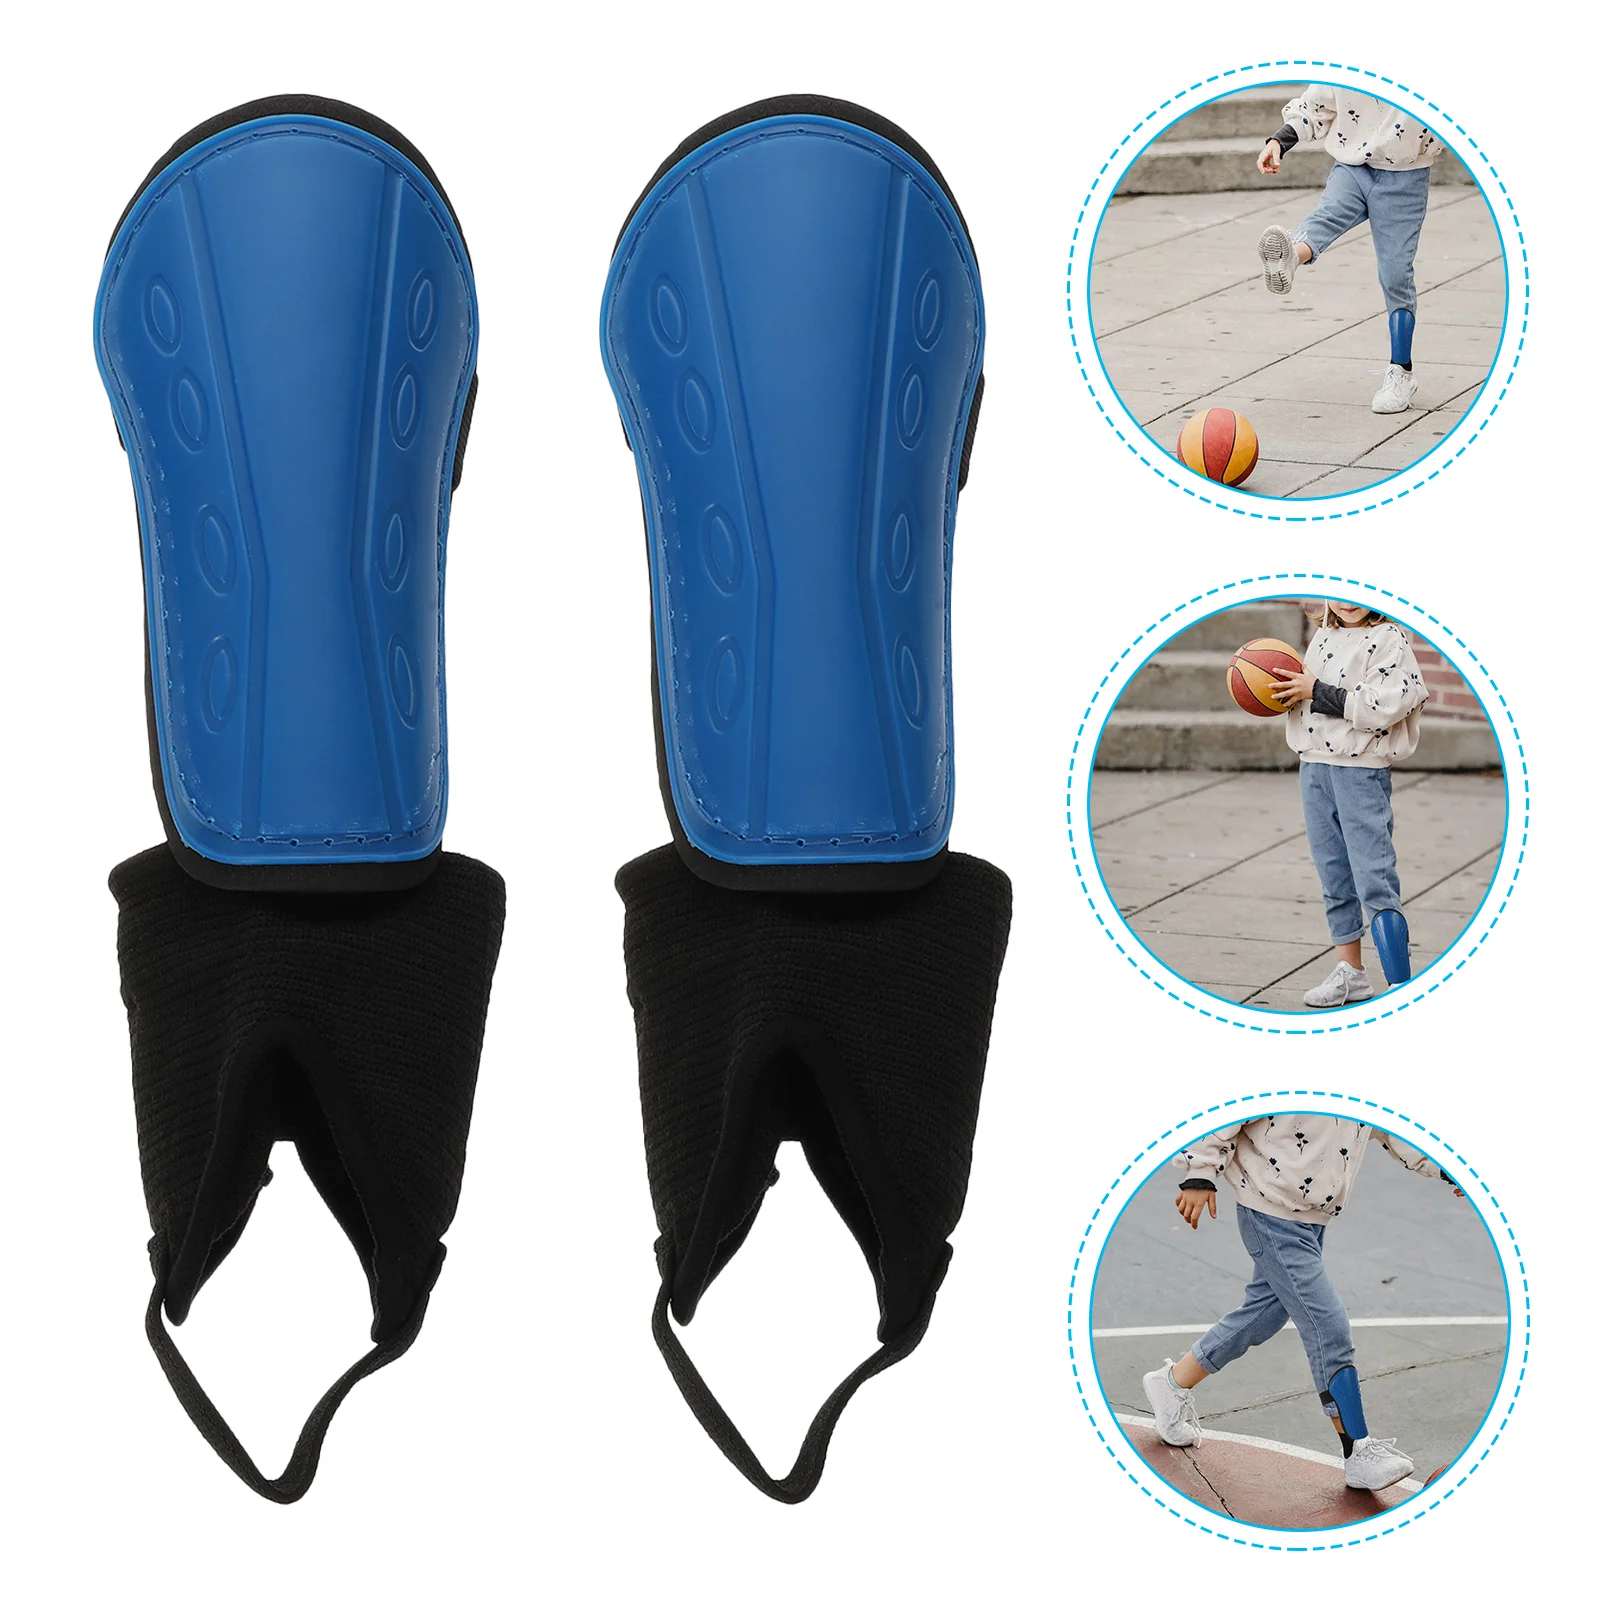 

1 Pair Outdoor Soccer Shin Pads Soccer Shin Guards with Elbow Pads (Blue)